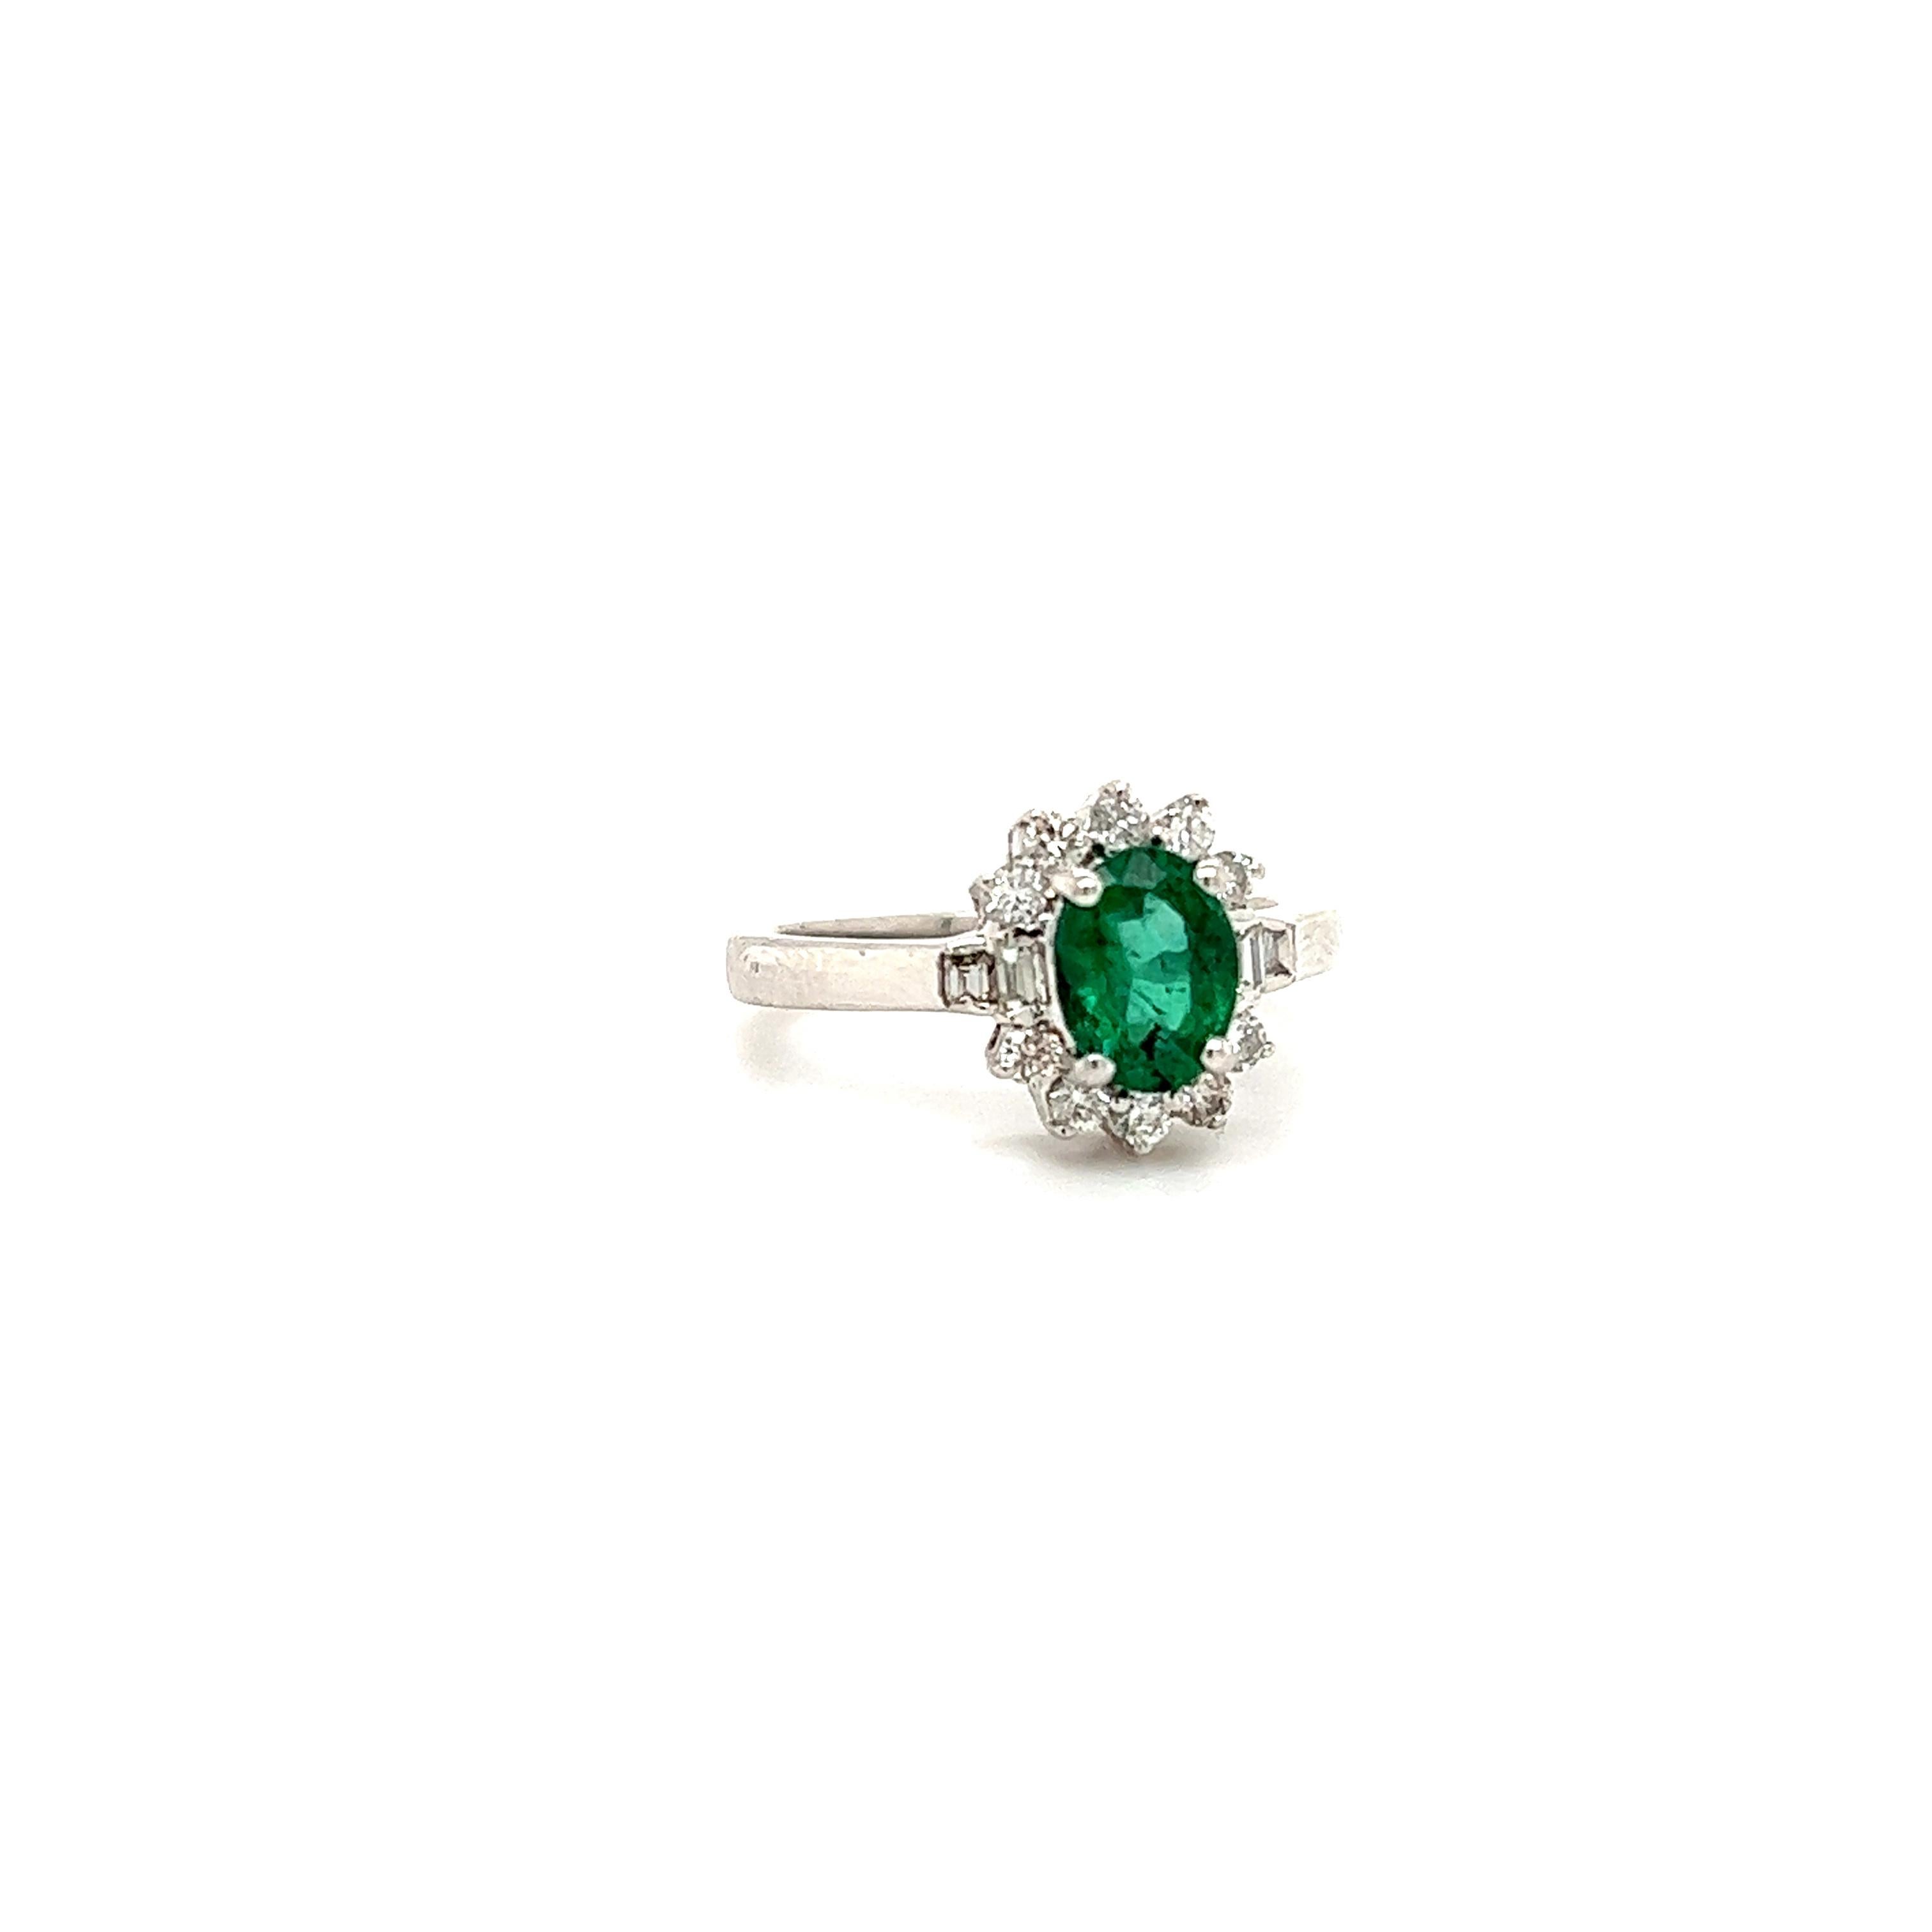 Beautiful ring crafted in 14k white gold. The ring highlights one emerald gemstone in an oval shape. The emerald displays a vivid green color and weighs approximately 1.25 ct. Accenting the emerald are natural round and step cut diamonds. The